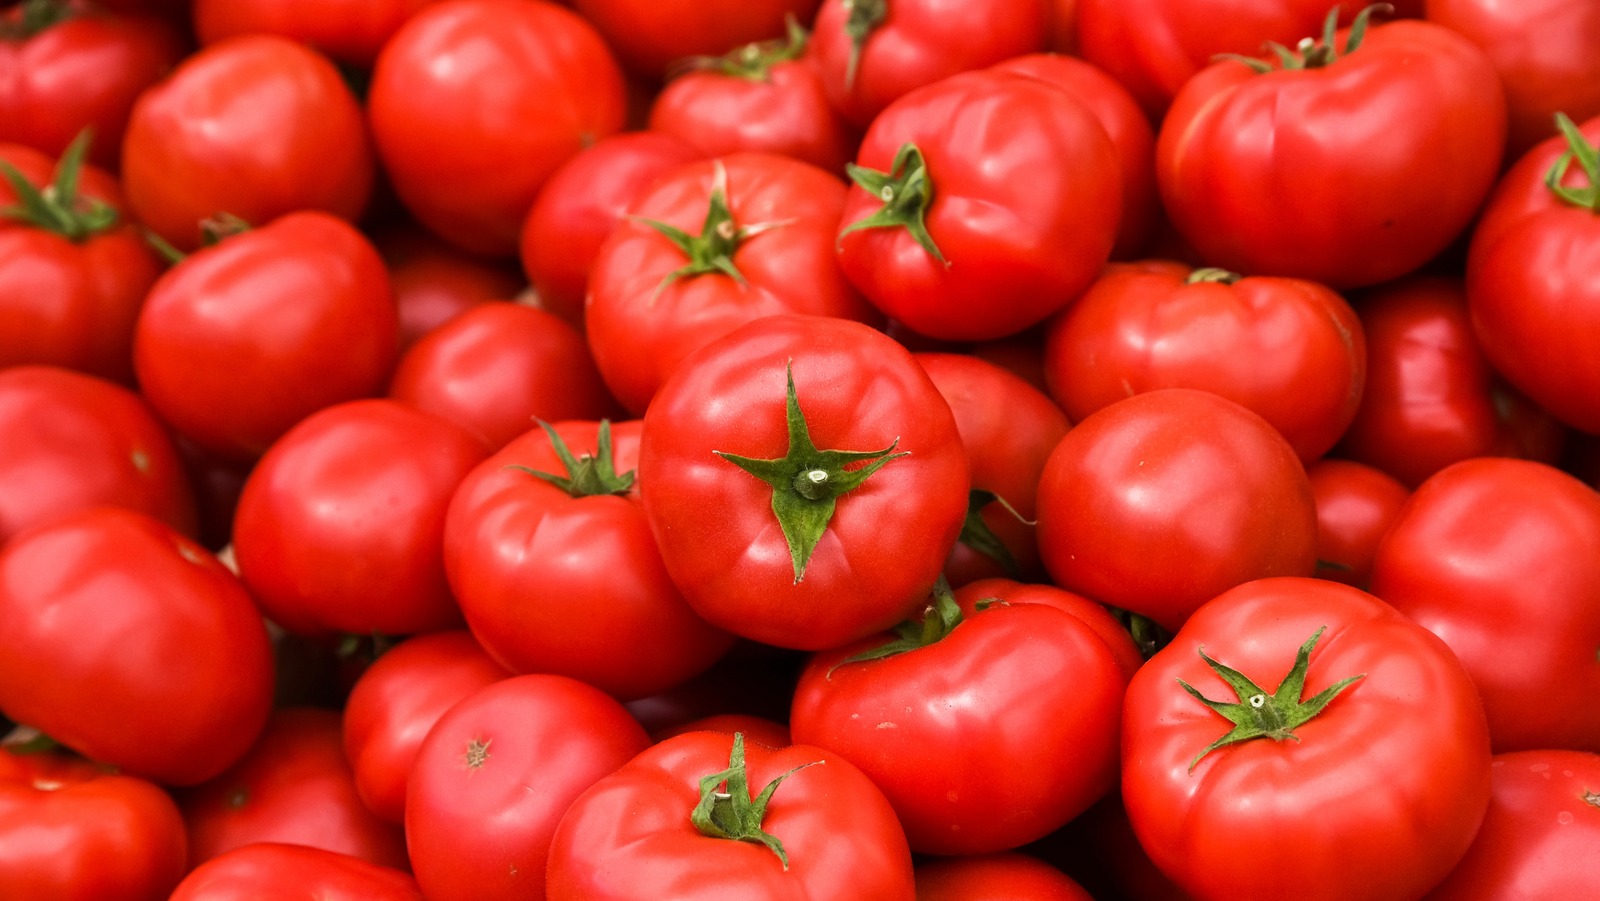 https://www.foodrepublic.com/img/gallery/13-things-you-didnt-know-about-tomatoes/l-intro-1684521109.jpg